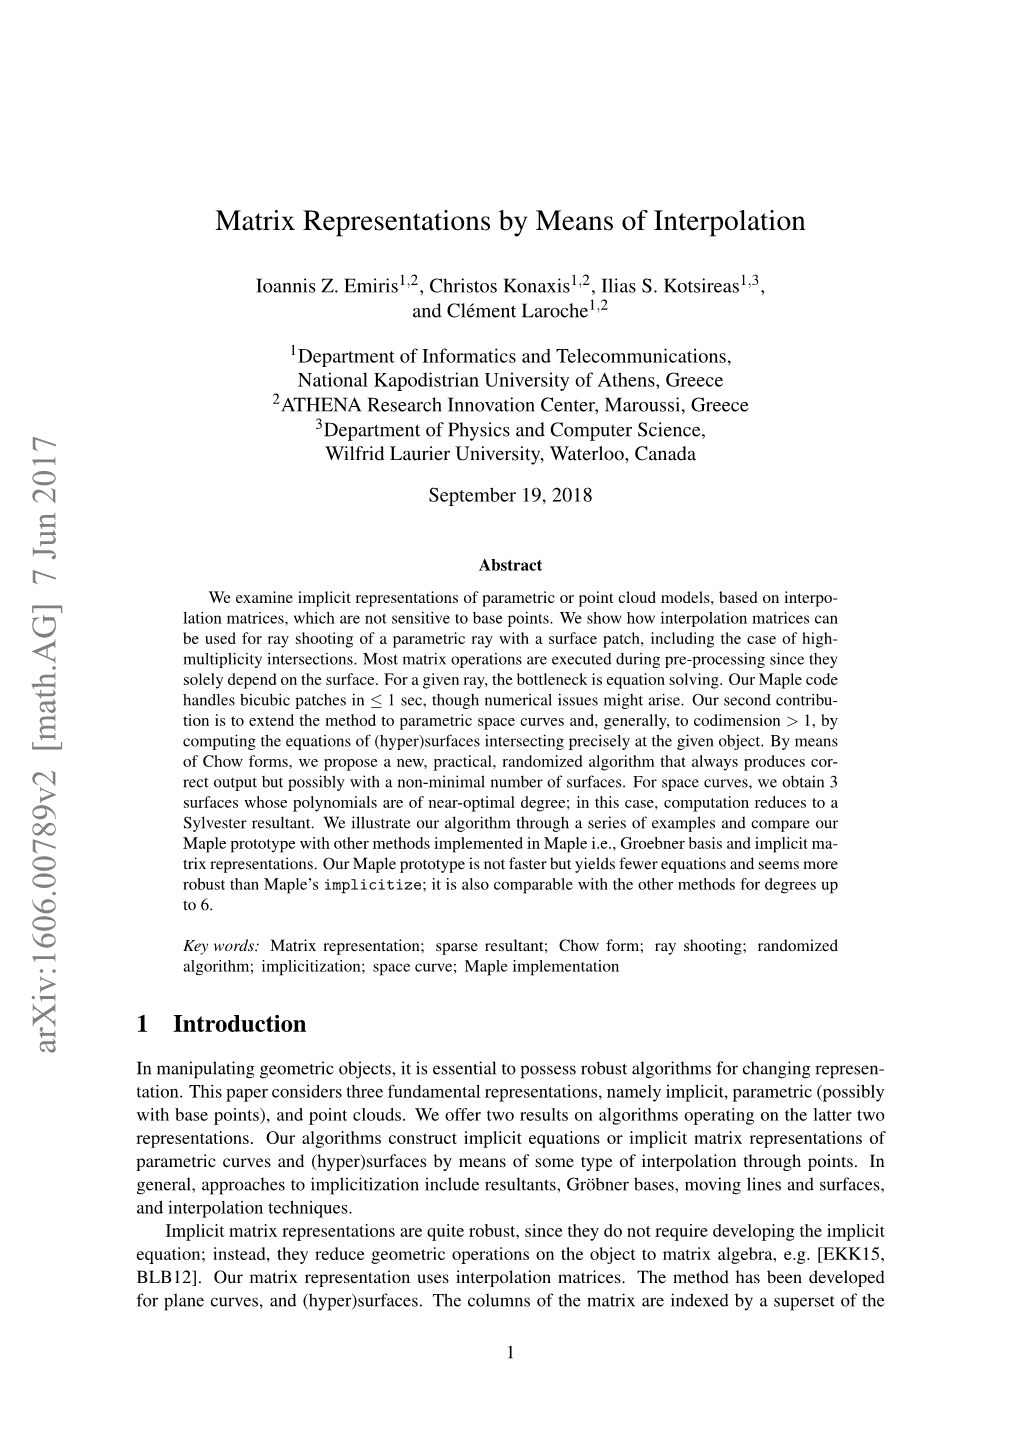 Matrix Representations by Means of Interpolation